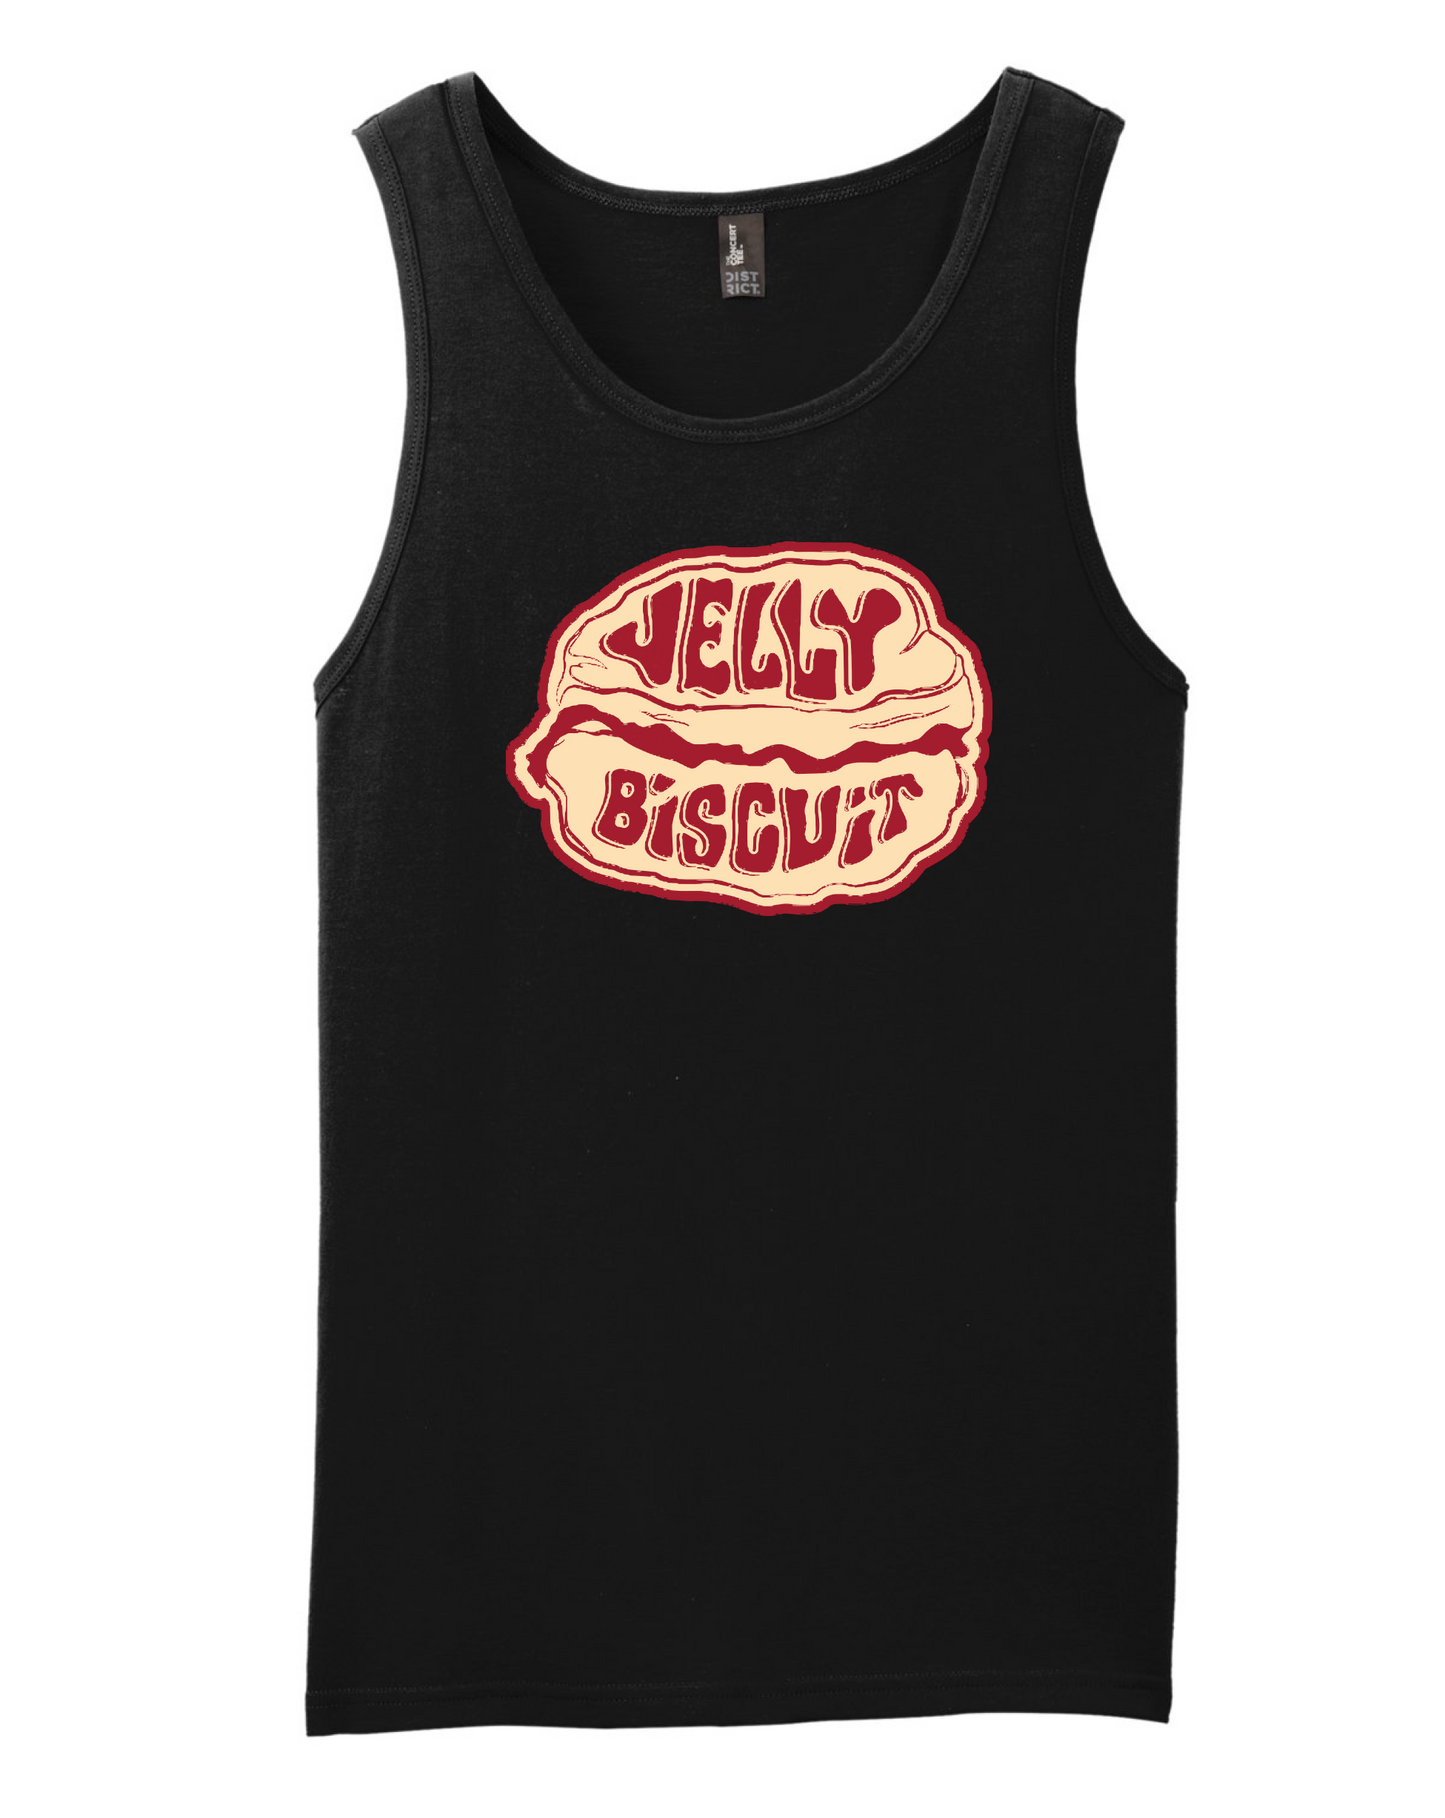 Jelly Biscuit - Logo - Black Tank Top